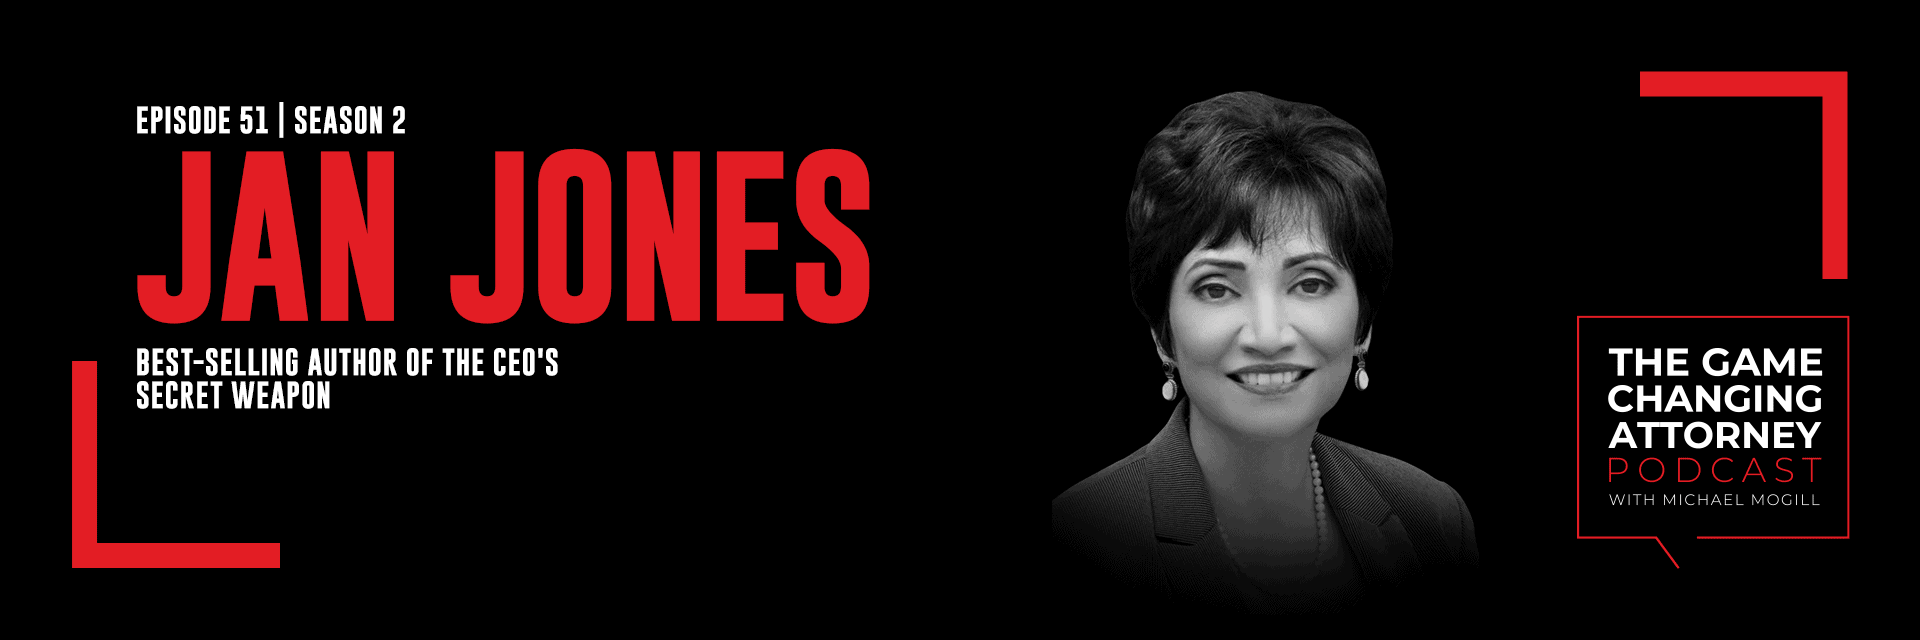 Jan Jones on The Game Changing Attorney Podcast - Header - 1920x640